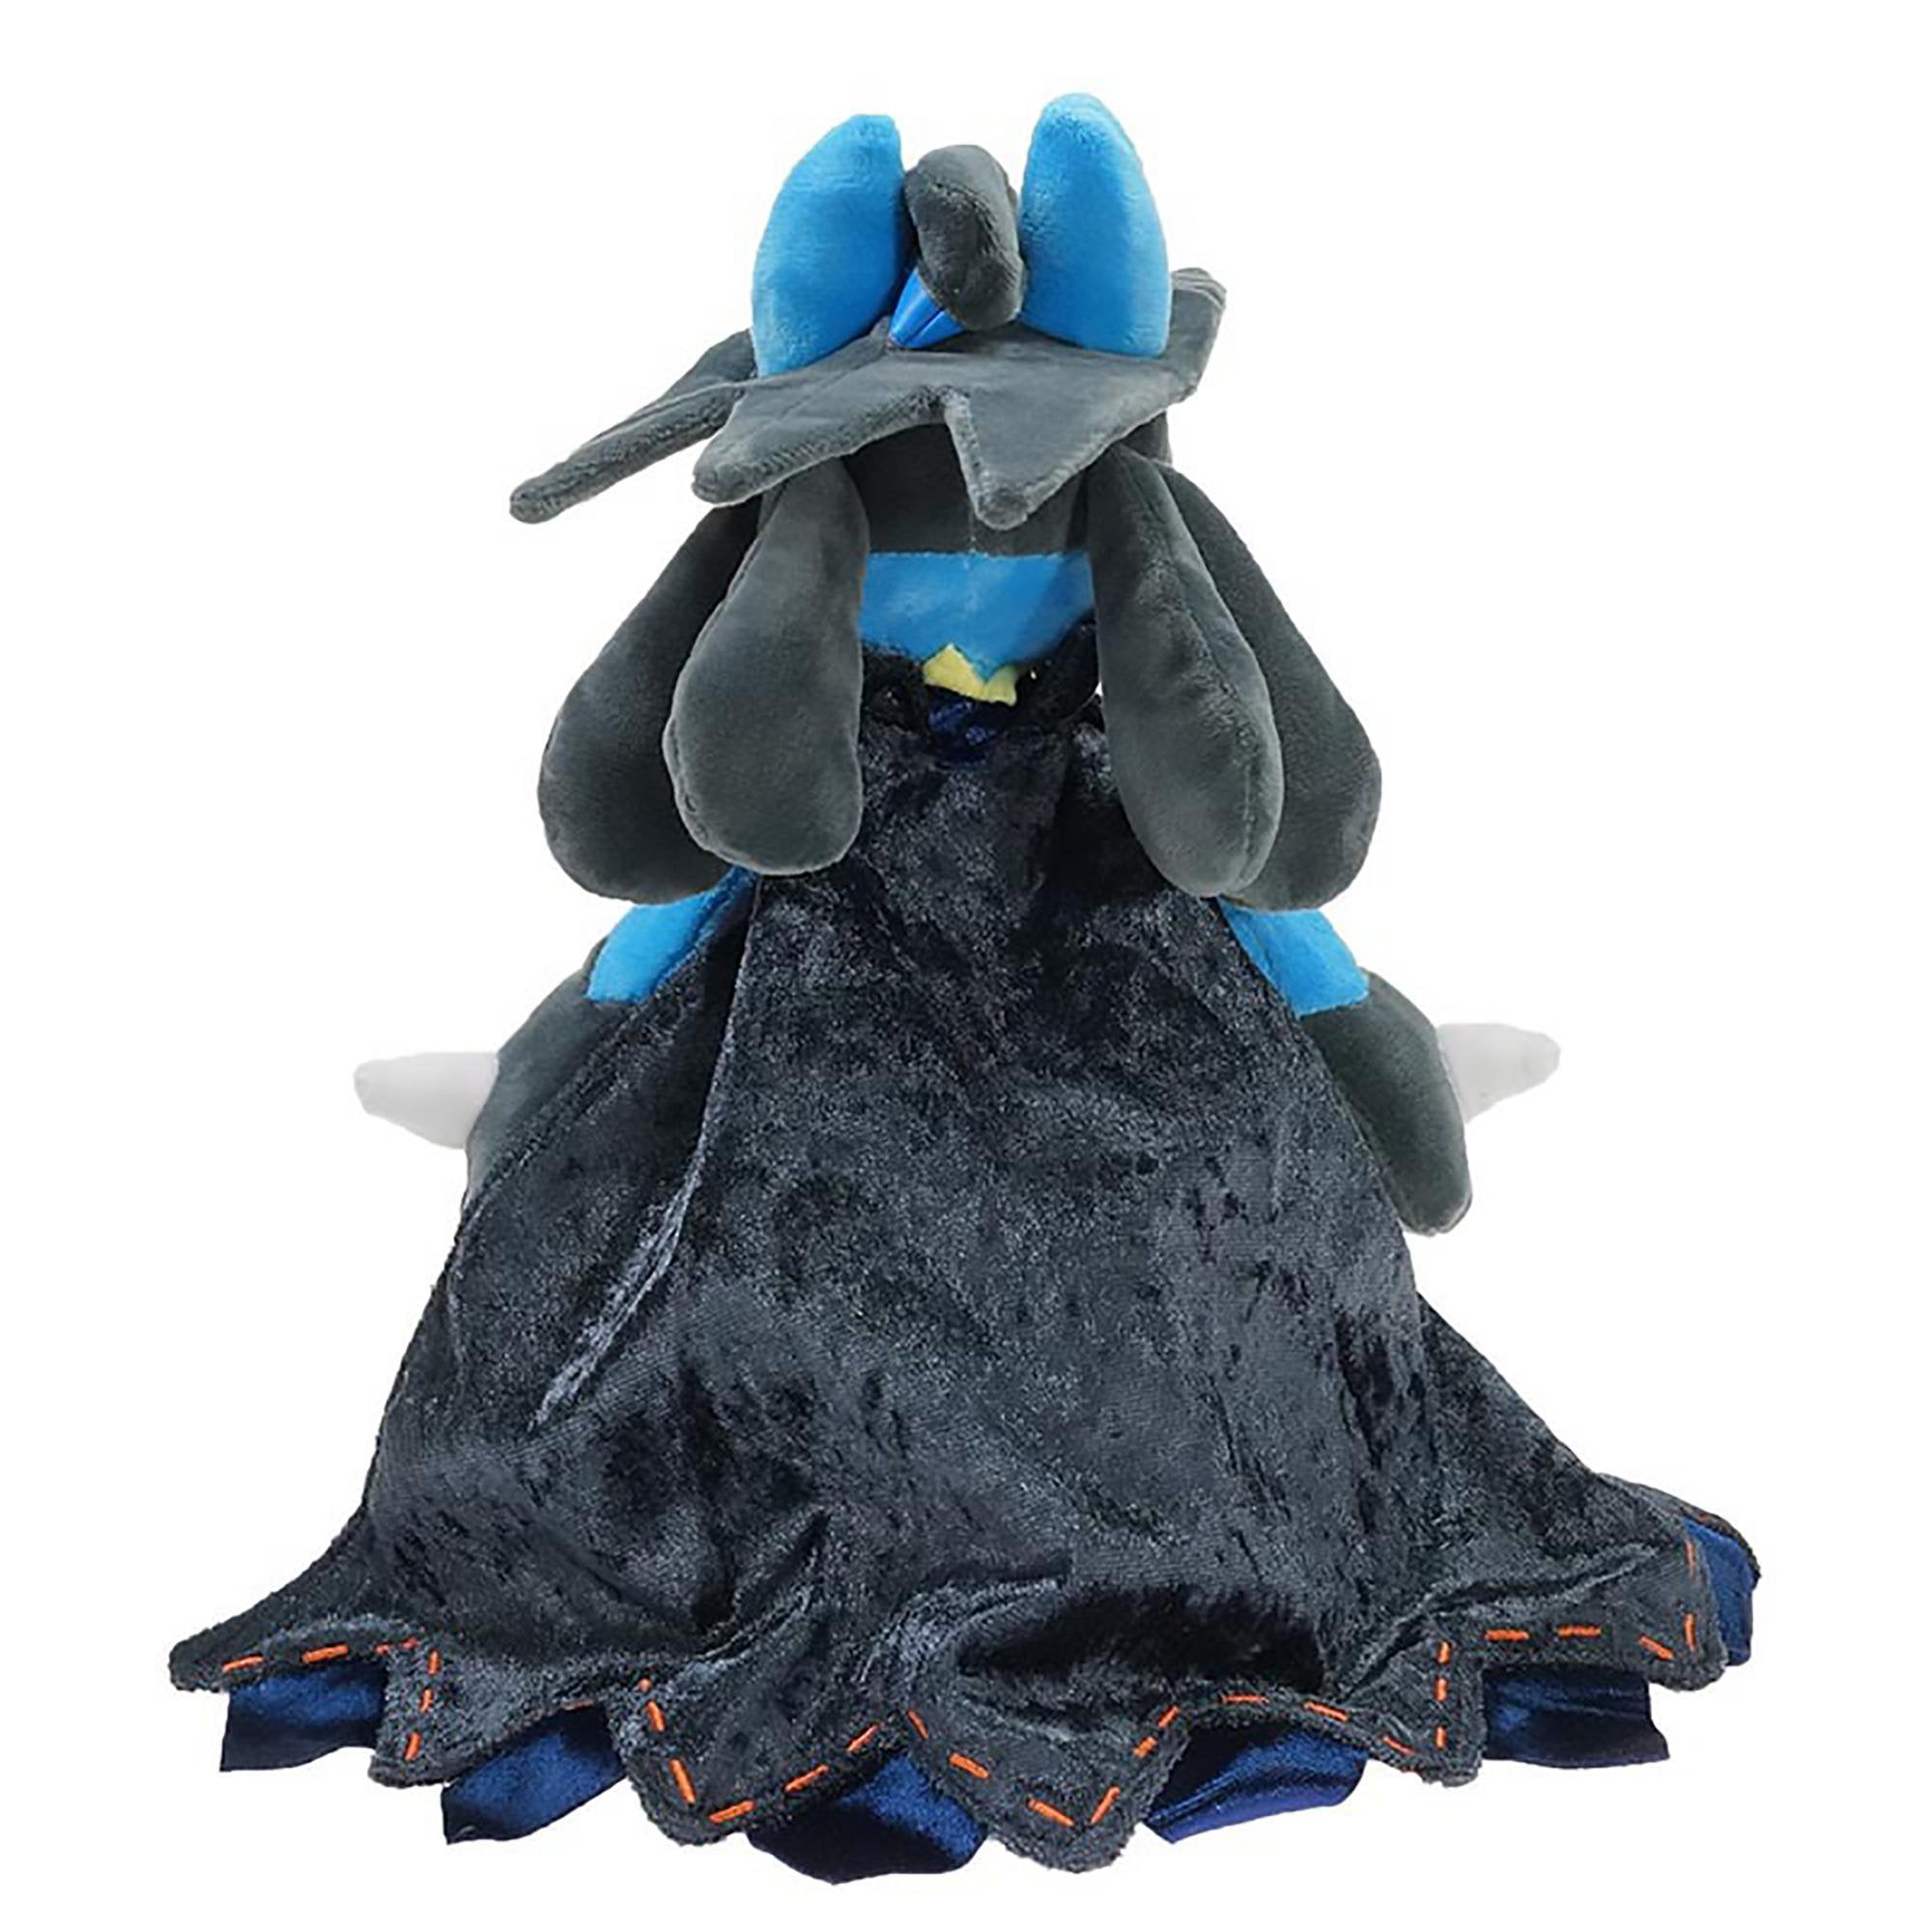 FASLMH Animal Kids 15 inch Halloween Costume Lucario Super Game Fans Young and Children Toys Plush Toy Soft Doll Figure Birthday Gift Birthday Gift Plush All-Star Series - Walmart.com